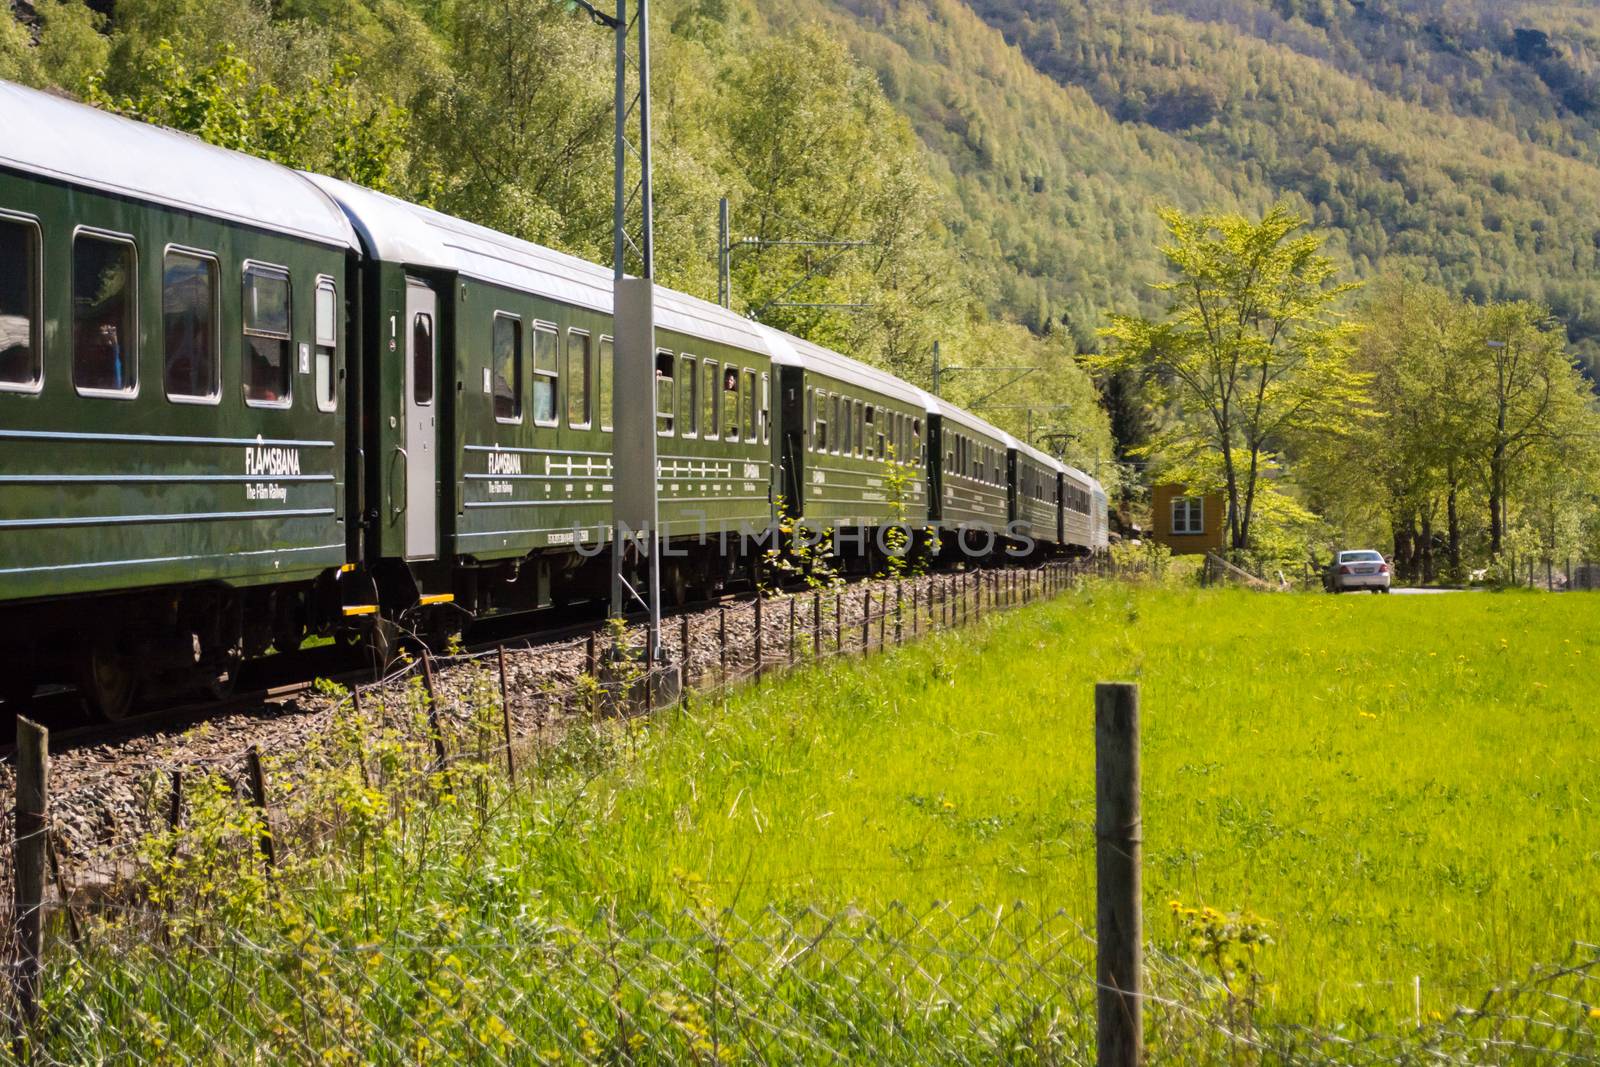 Flam, Norway, May 2015: train carriages of the Flamsbana (Flam Line) running through a green valley. Flam railway is a railway line between Myrdal and Flåm in Aurland, Norway.